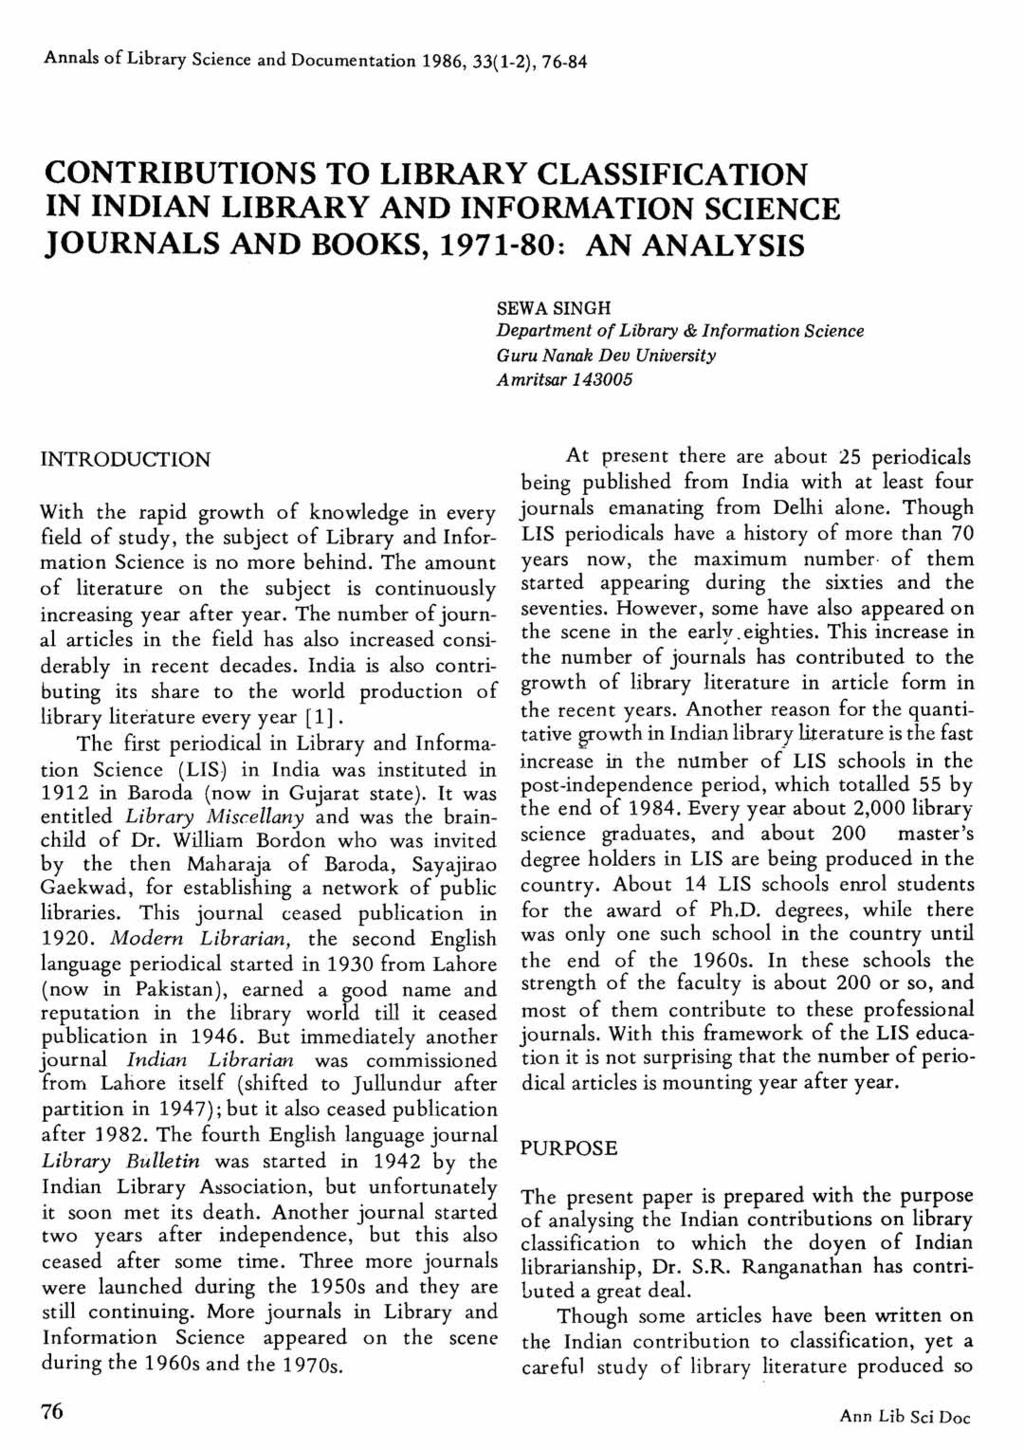 Annals of Library Science and Documentation 986,33(-2),76-84 CONTRIBUTIONS TO LIBRARY CLASSIFICATION IN INDIAN LIBRARY AND INFORMATION SCIENCE JOURNALS AND BOOKS, 97-80: AN ANALYSIS SEWASINGH